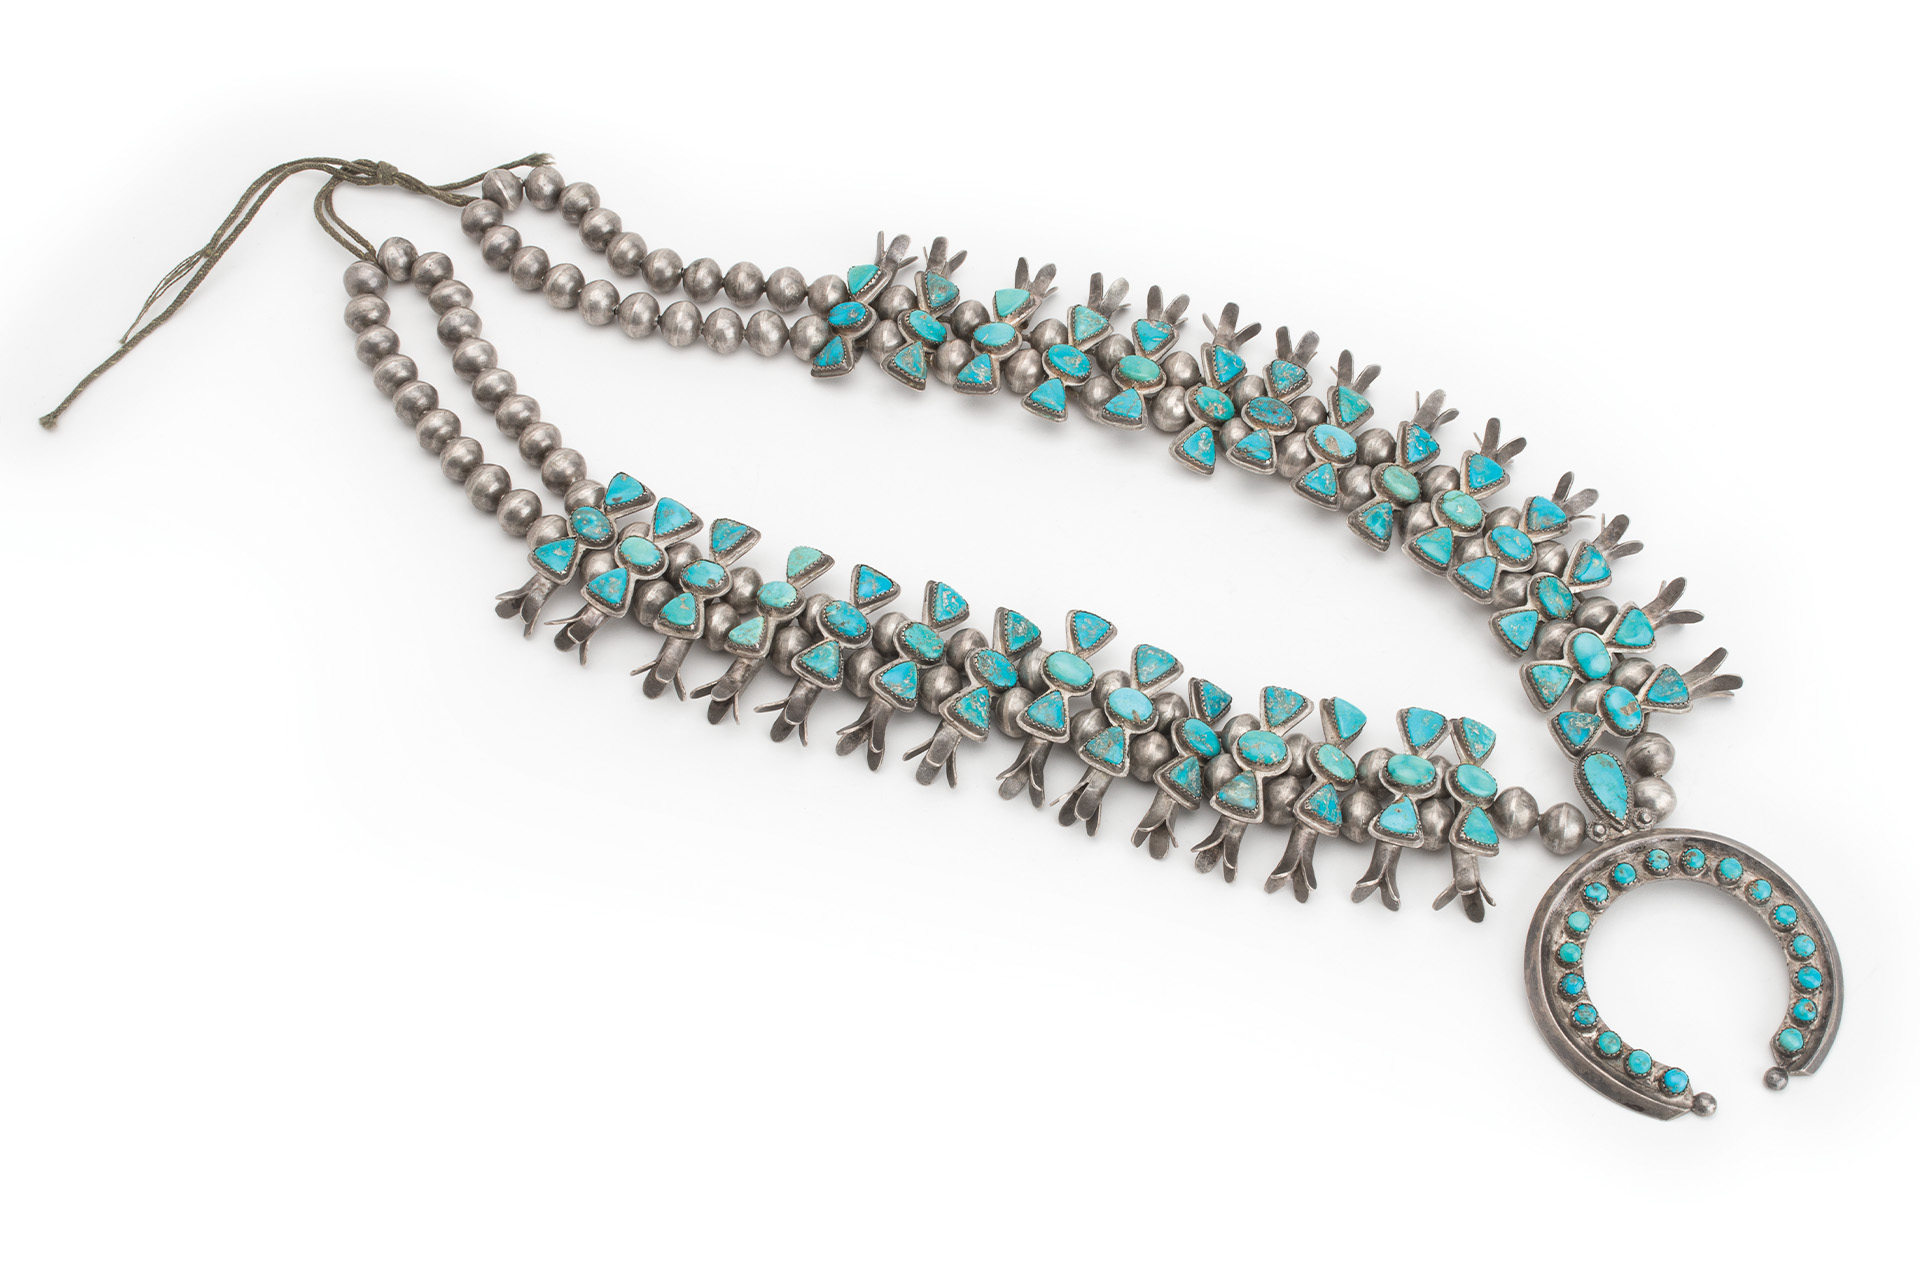 A turquoise and silver necklace with a crescent moon.